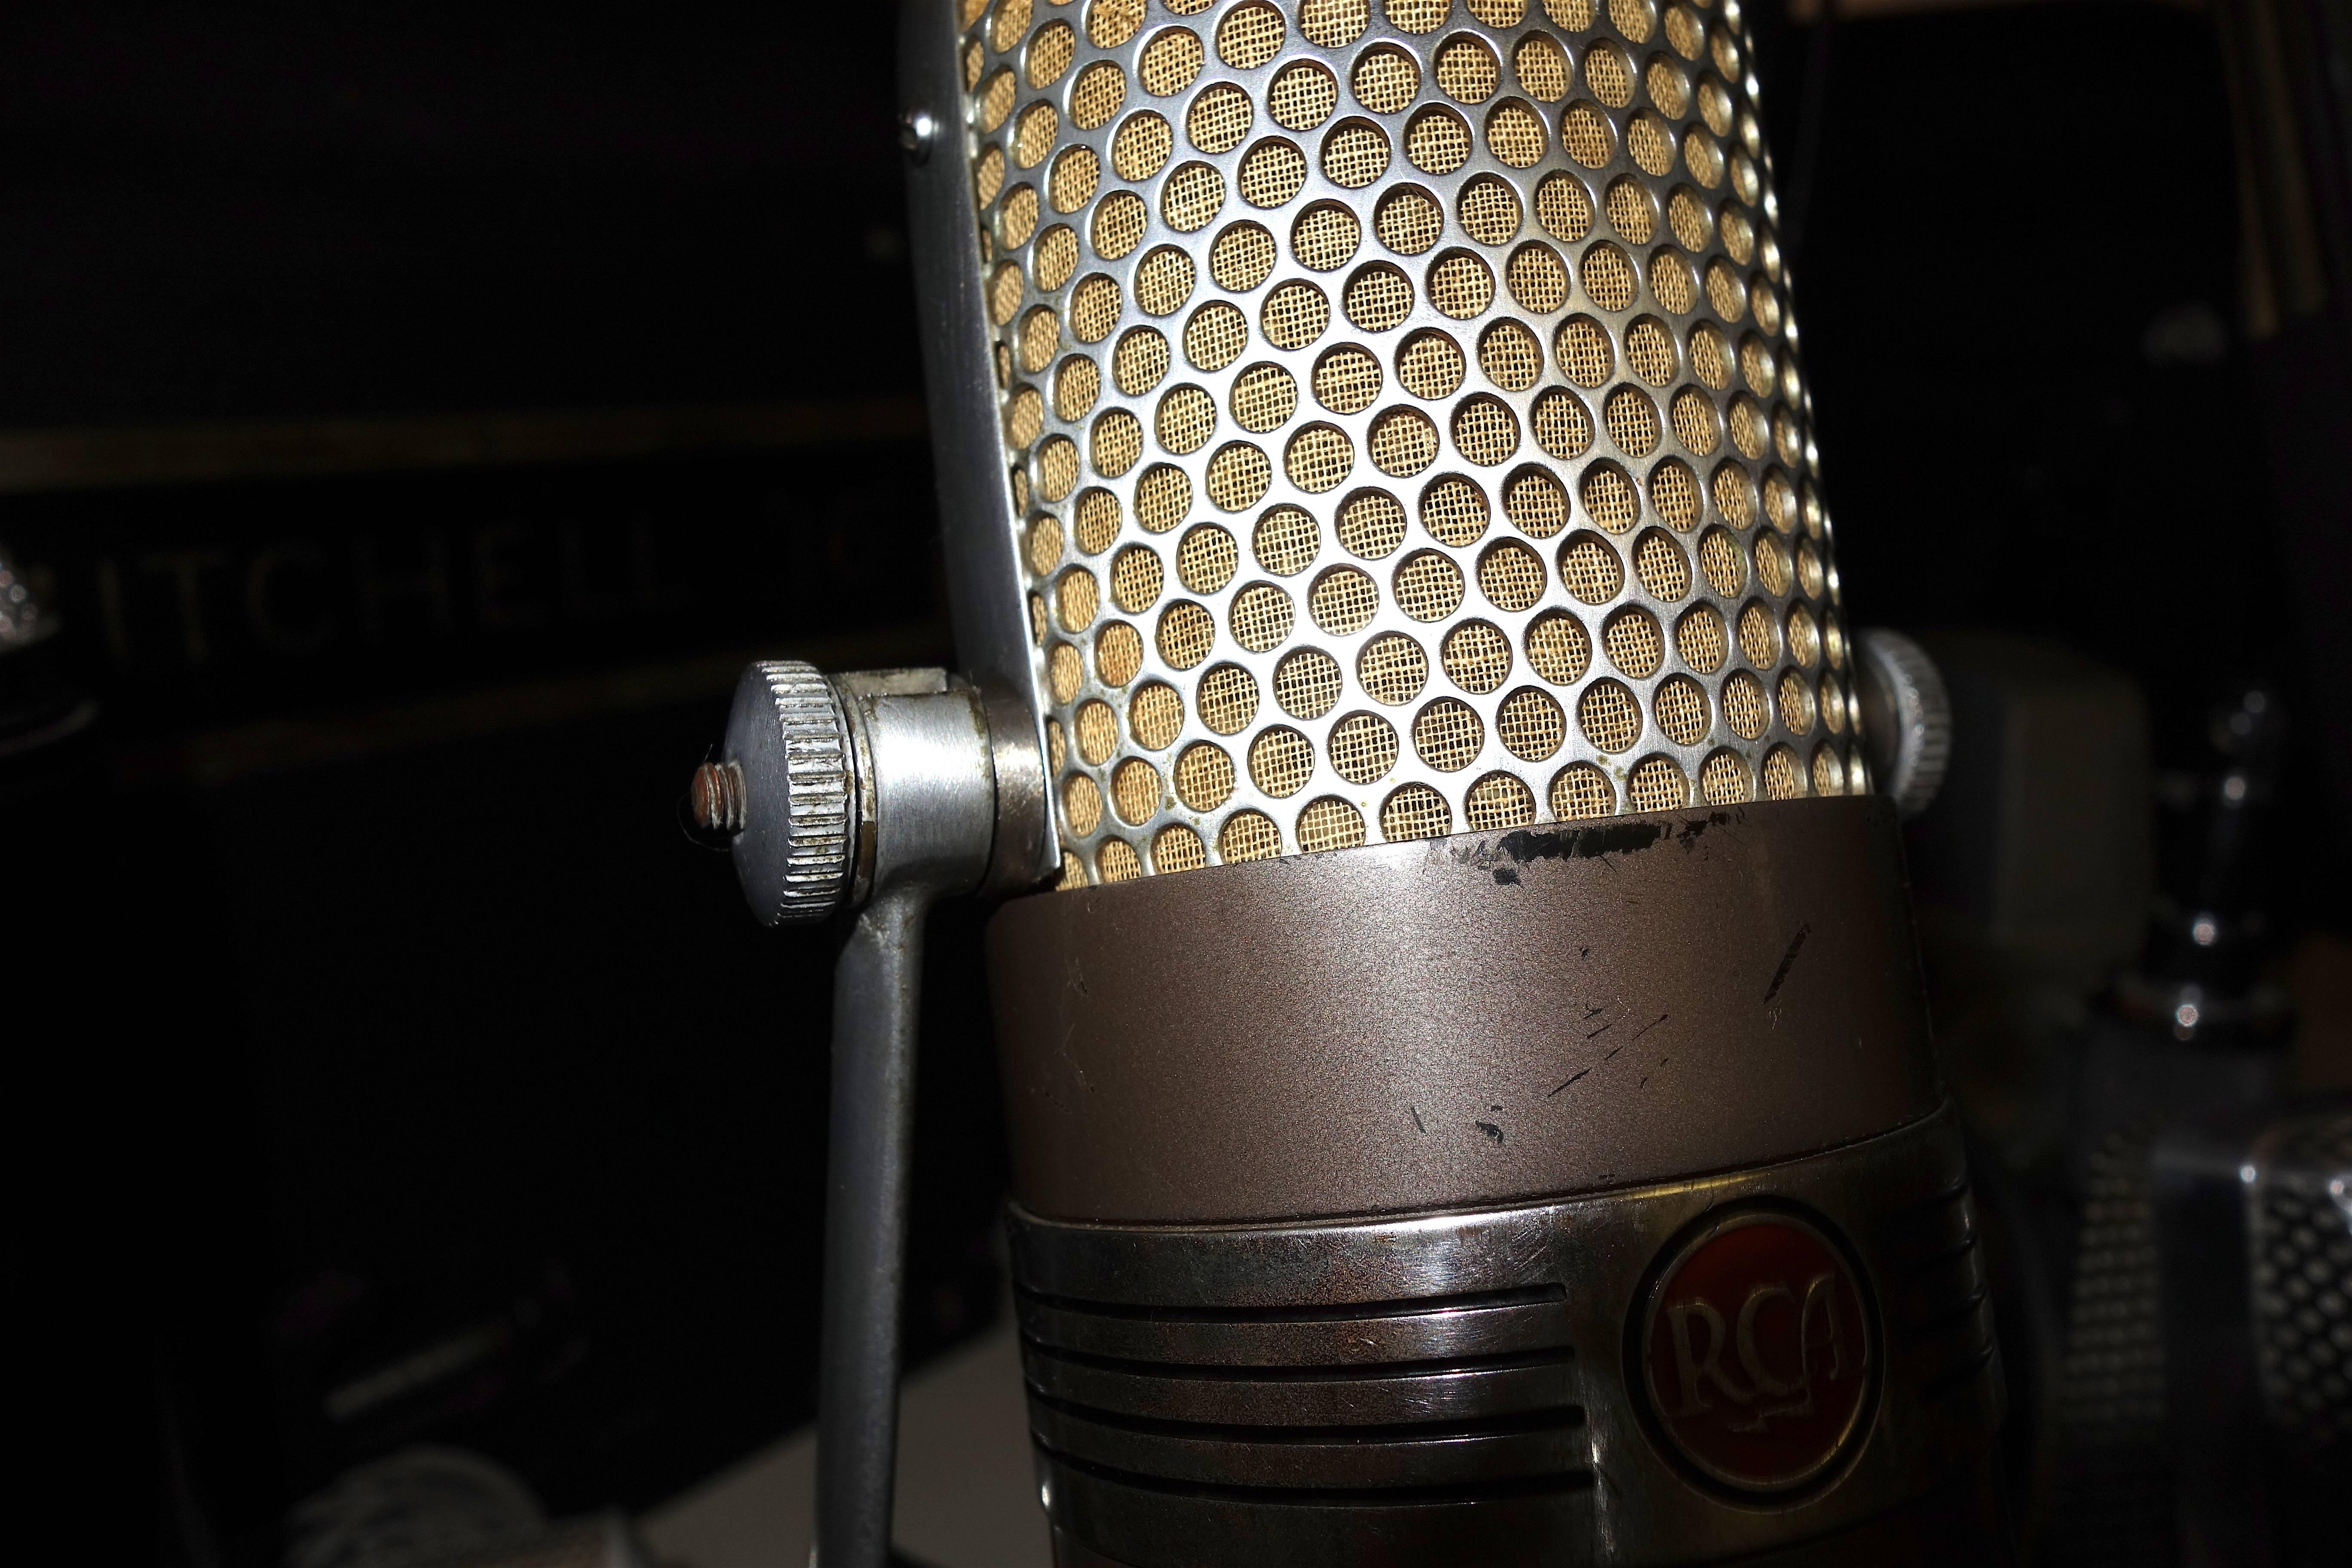 Industrial Coach Bear Bryant Use History Iconic 1950s RCA Studio Mic As Sculpture ON SALE For Sale